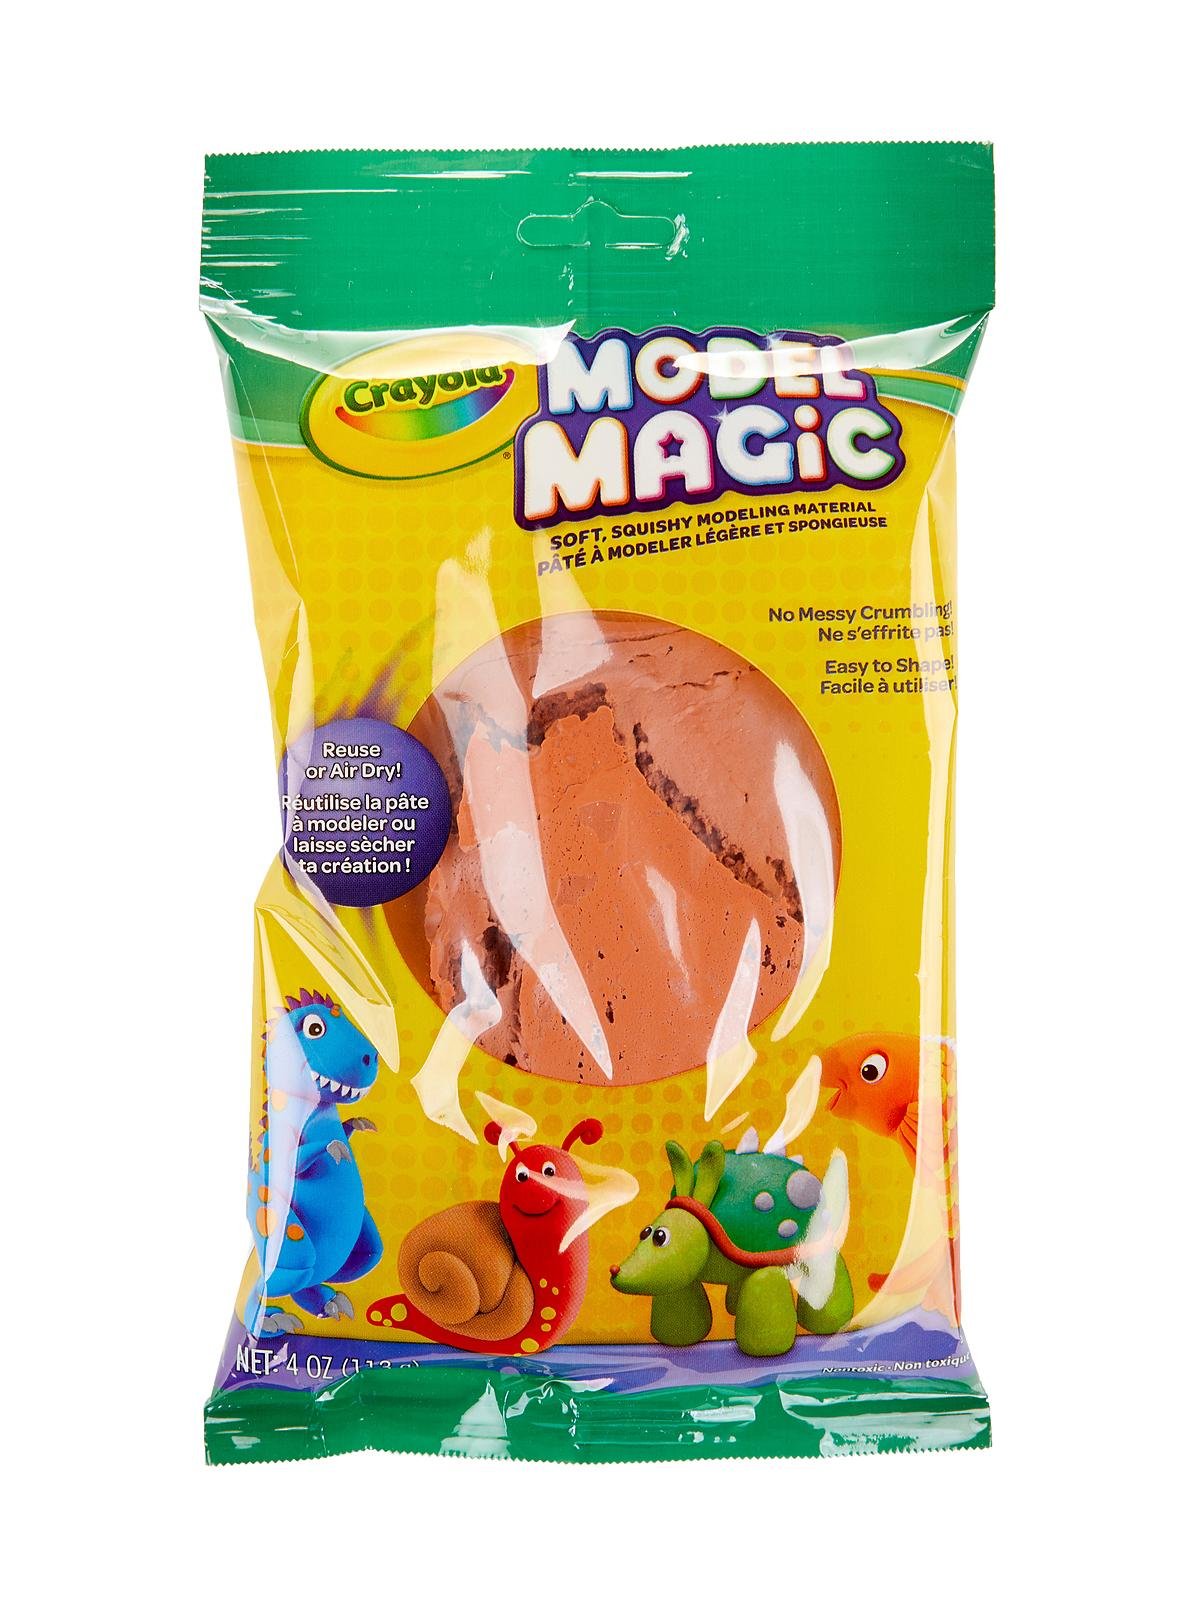 Crayola Model Magic Modeling Compound 8 oz each/Neon 2 lbs. 232413, 1 -  Foods Co.